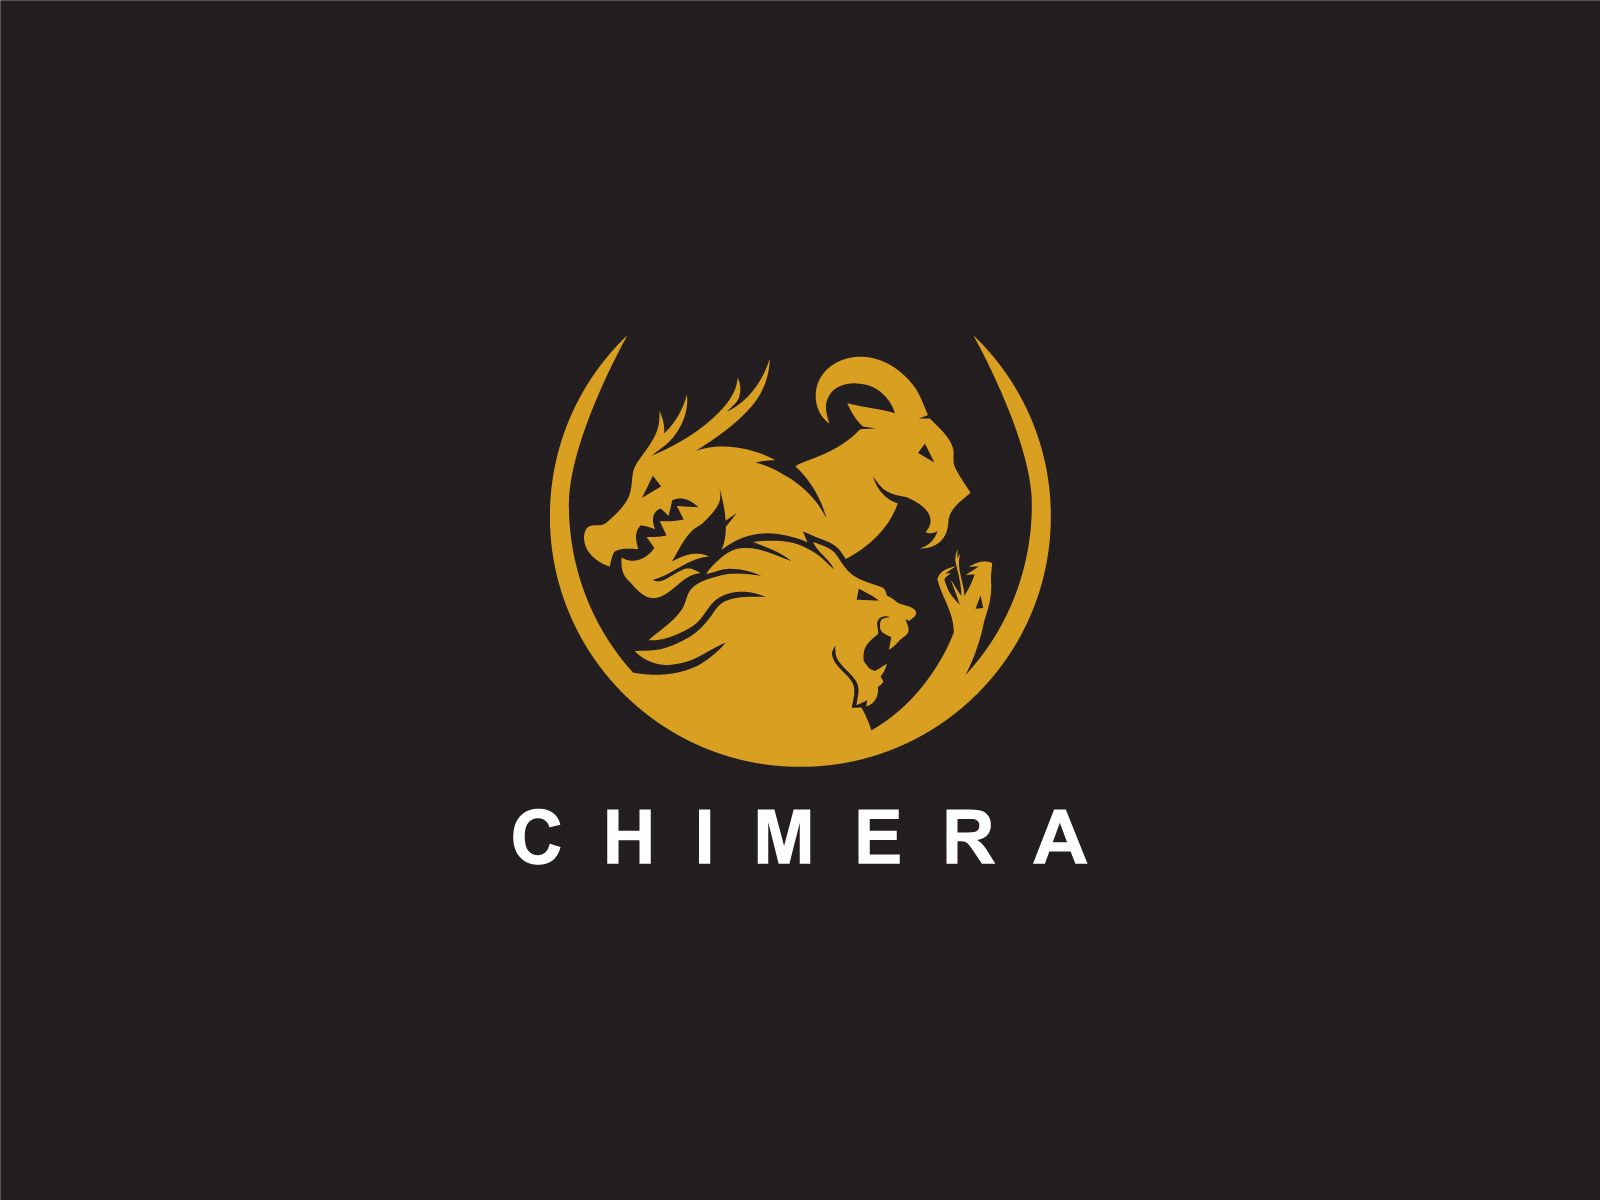 Chimera Logo by Hussnain Graphics on Dribbble